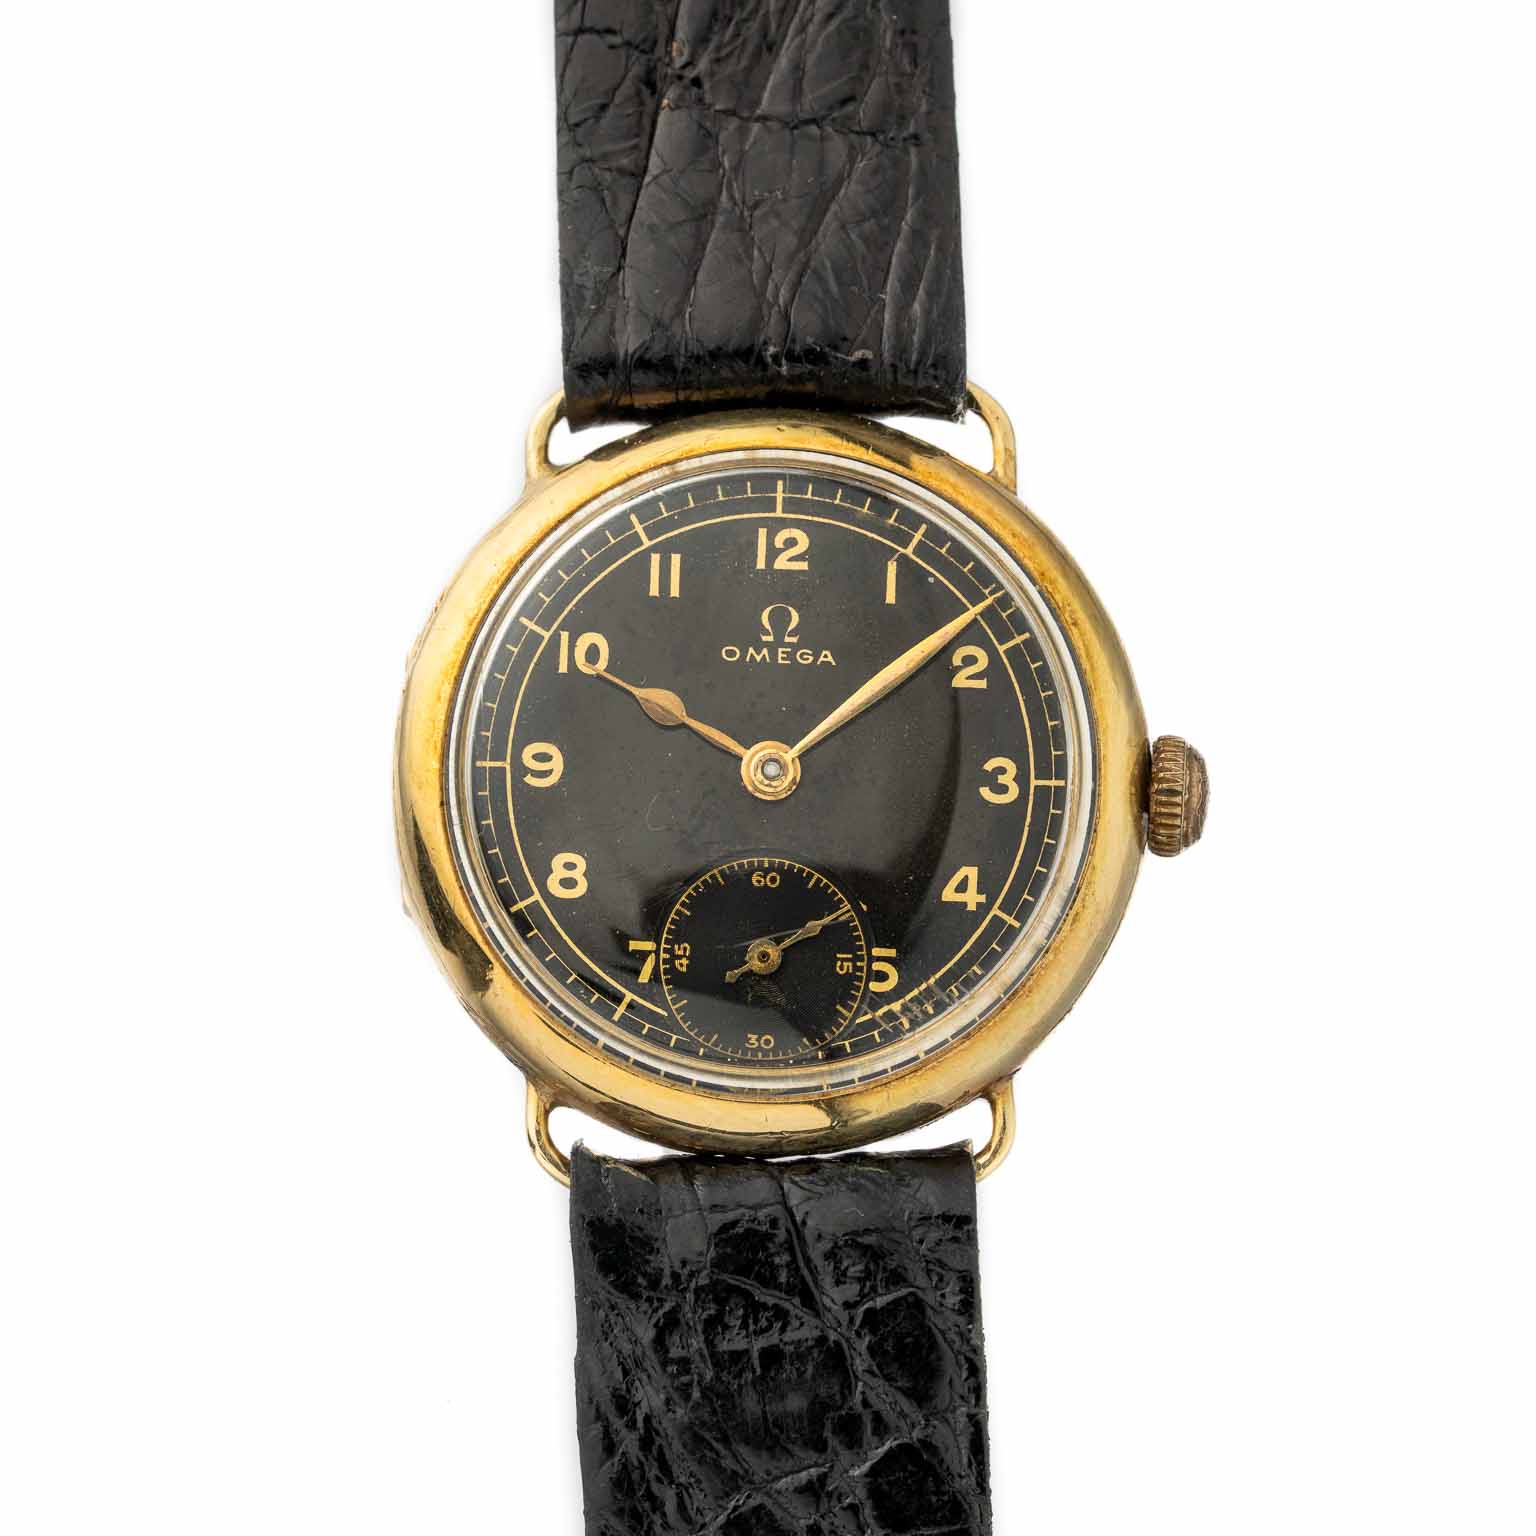 Vintage Omega sub seconds watch with black gilt dial 9791060 from 1930s watch front